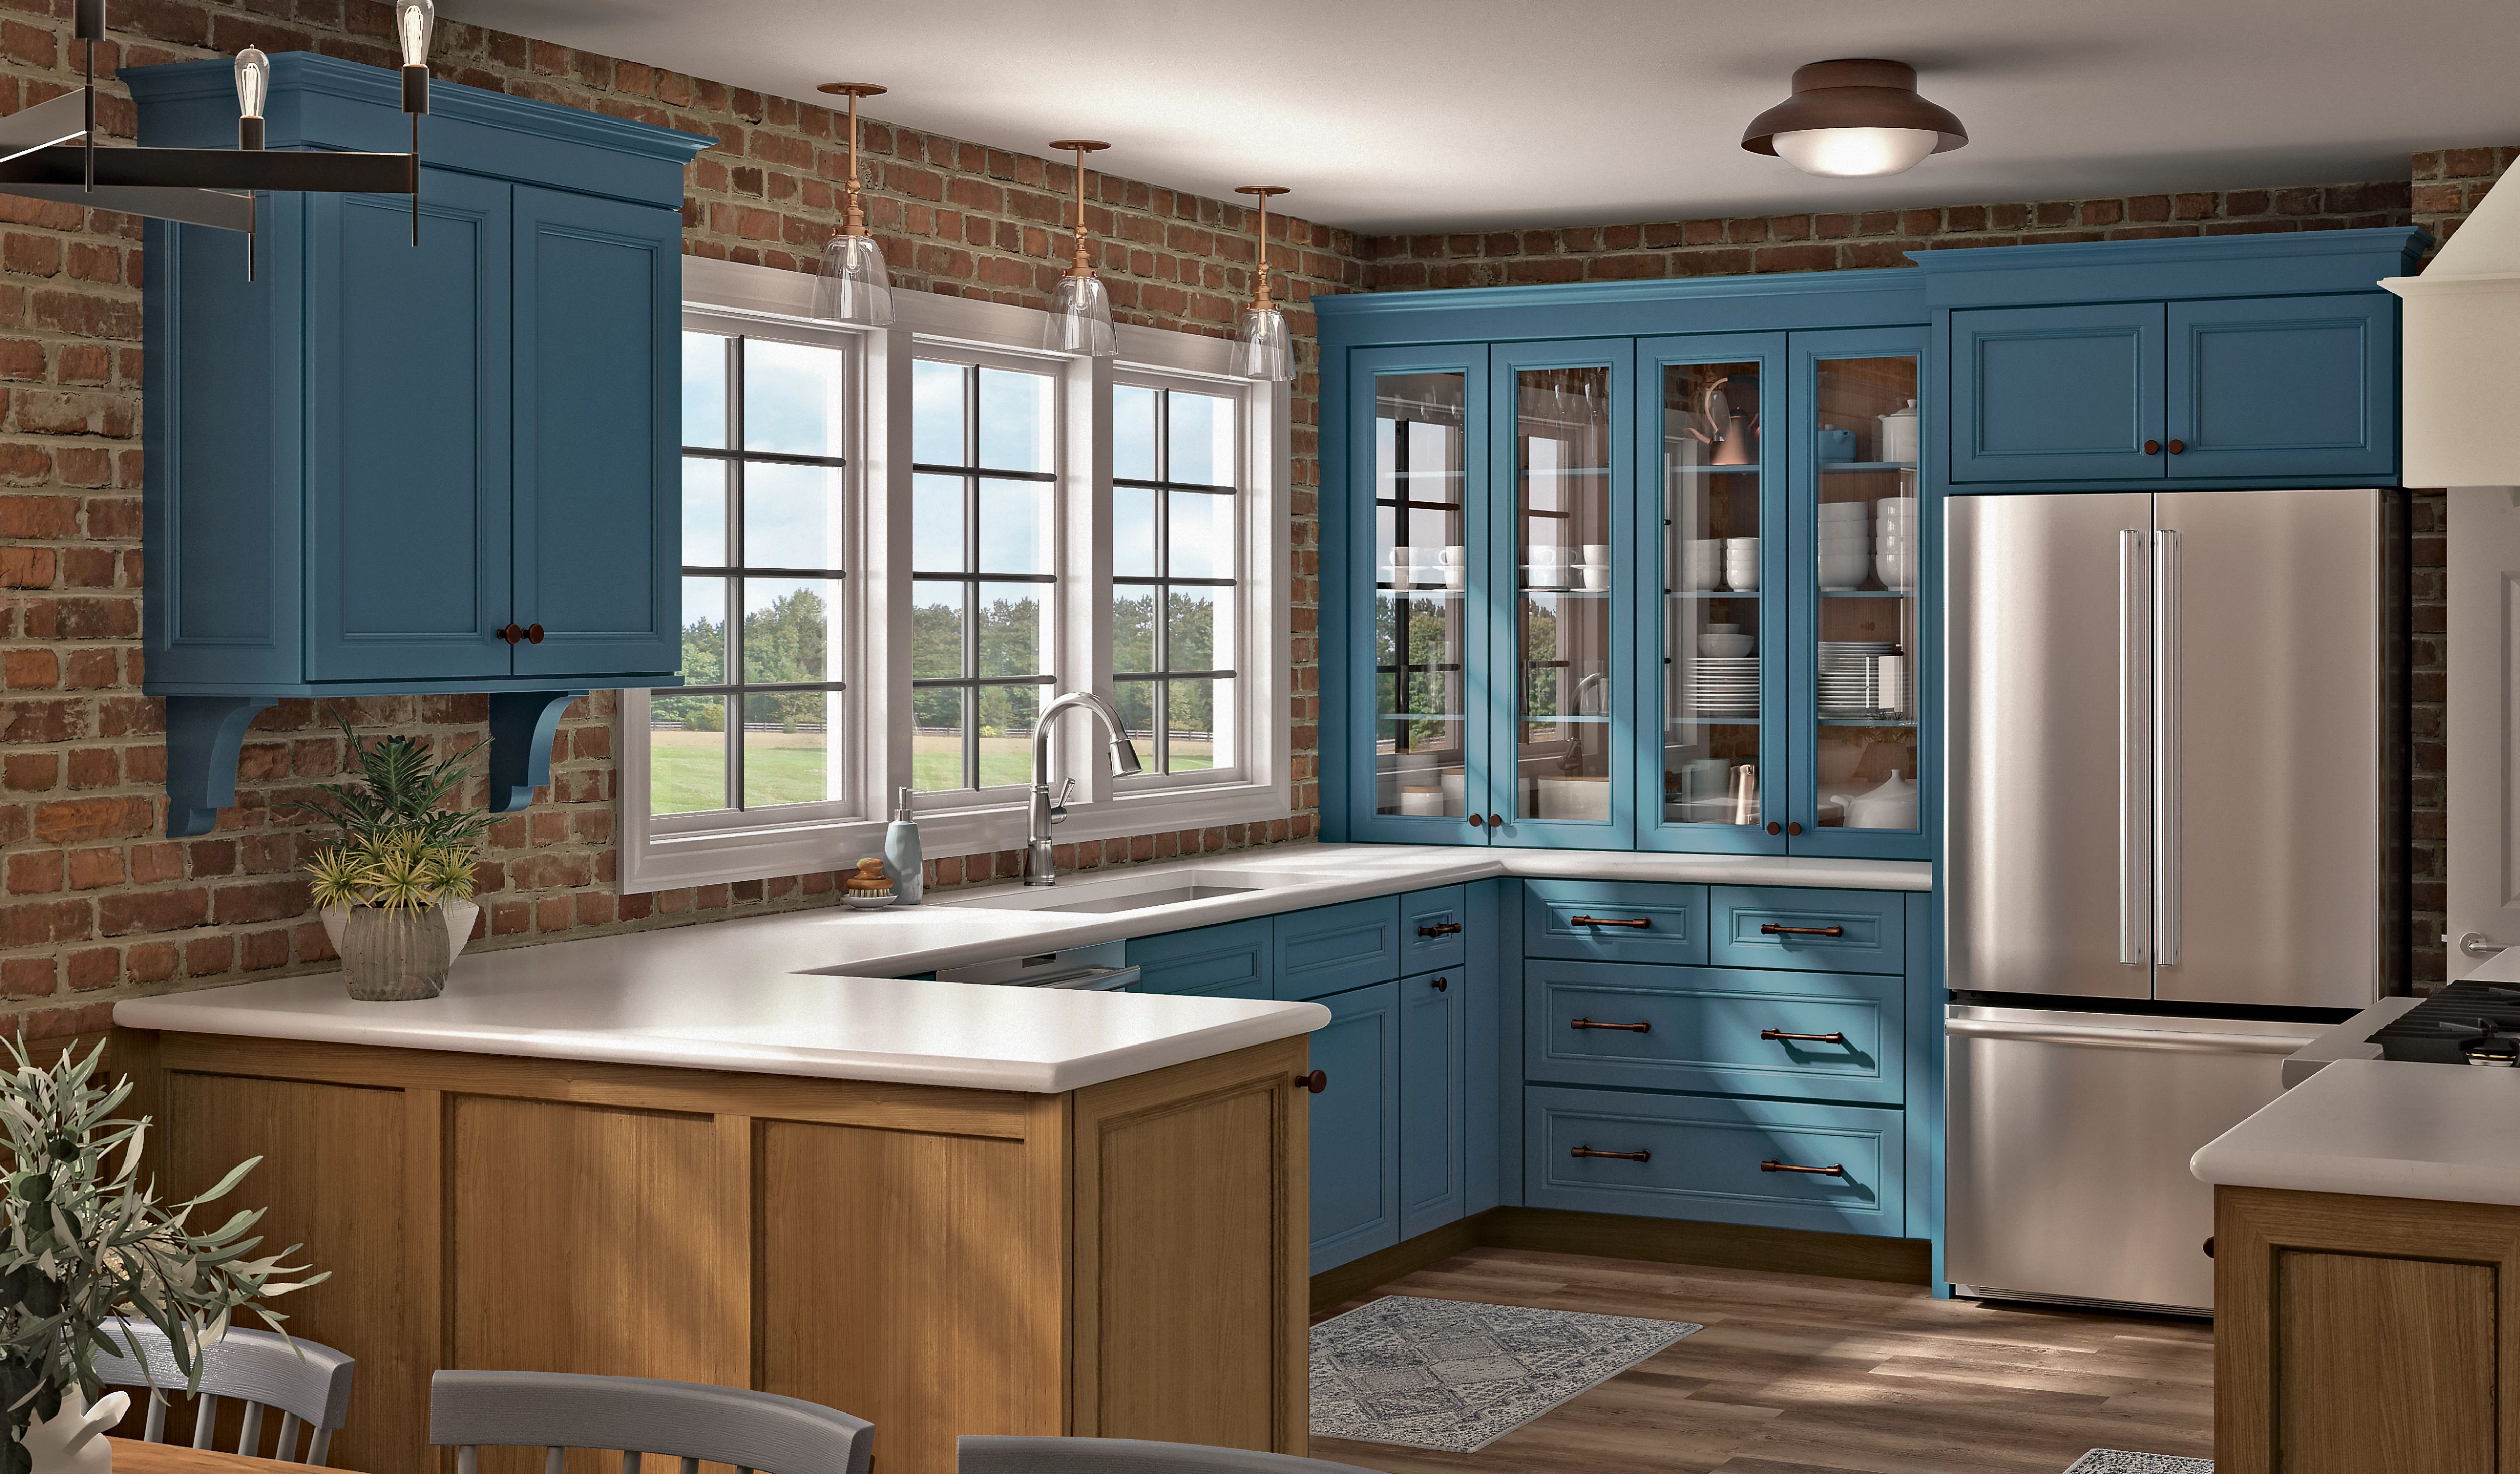 Transitional kitchen featuring blue KraftMaid cabinet color